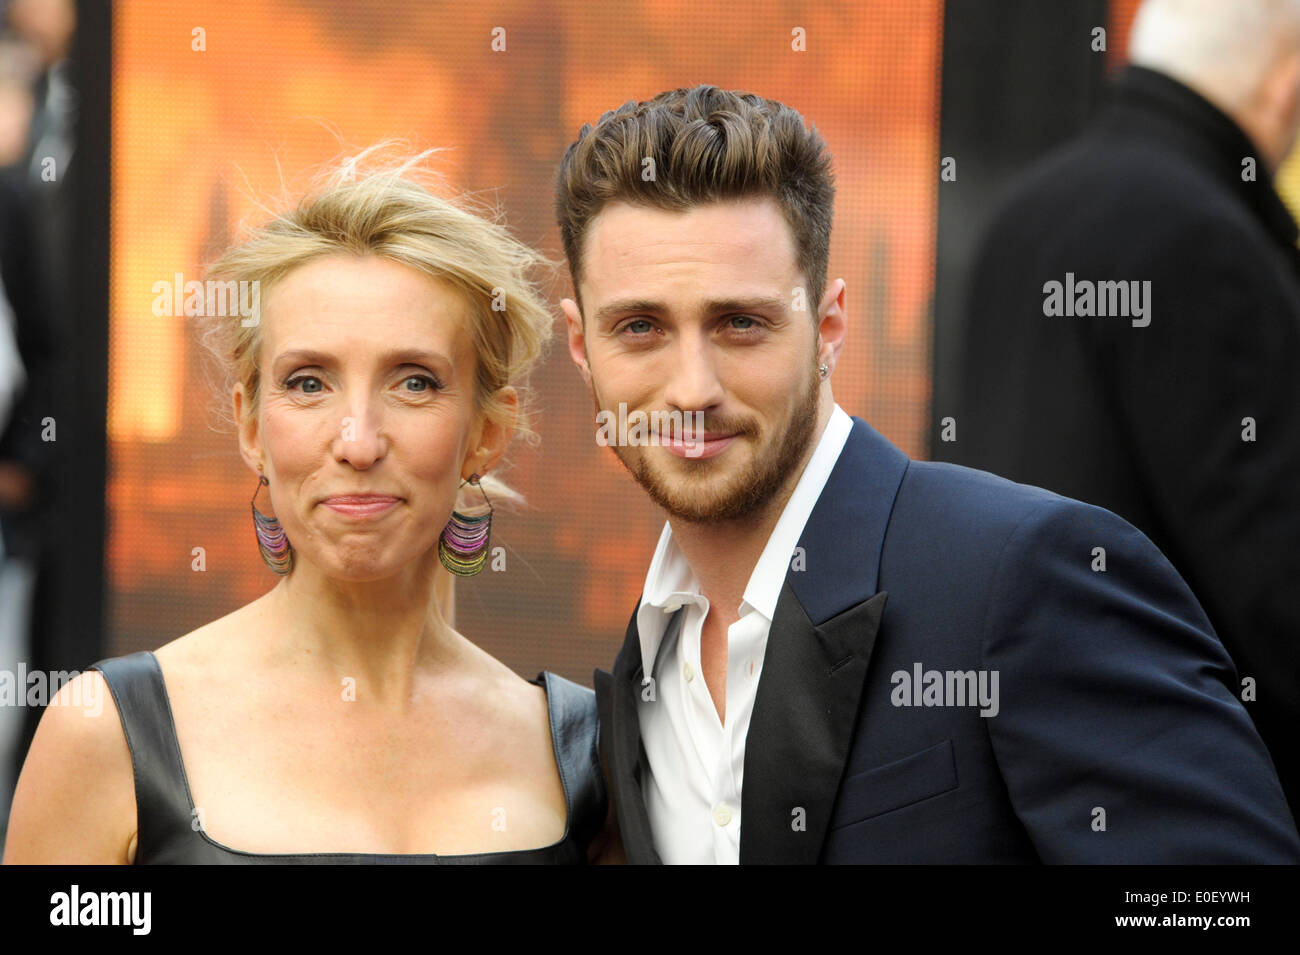 Sam Taylor-Wood and Aaron Taylor-Johnson attends the GODZILLA EUROPEAN PREMIERE on 11/05/2014 at ODEON Leicester Square, London. Persons pictured: Sam Taylor-Wood, Aaron Taylor-Johnson. Picture by Julie Edwards Stock Photo